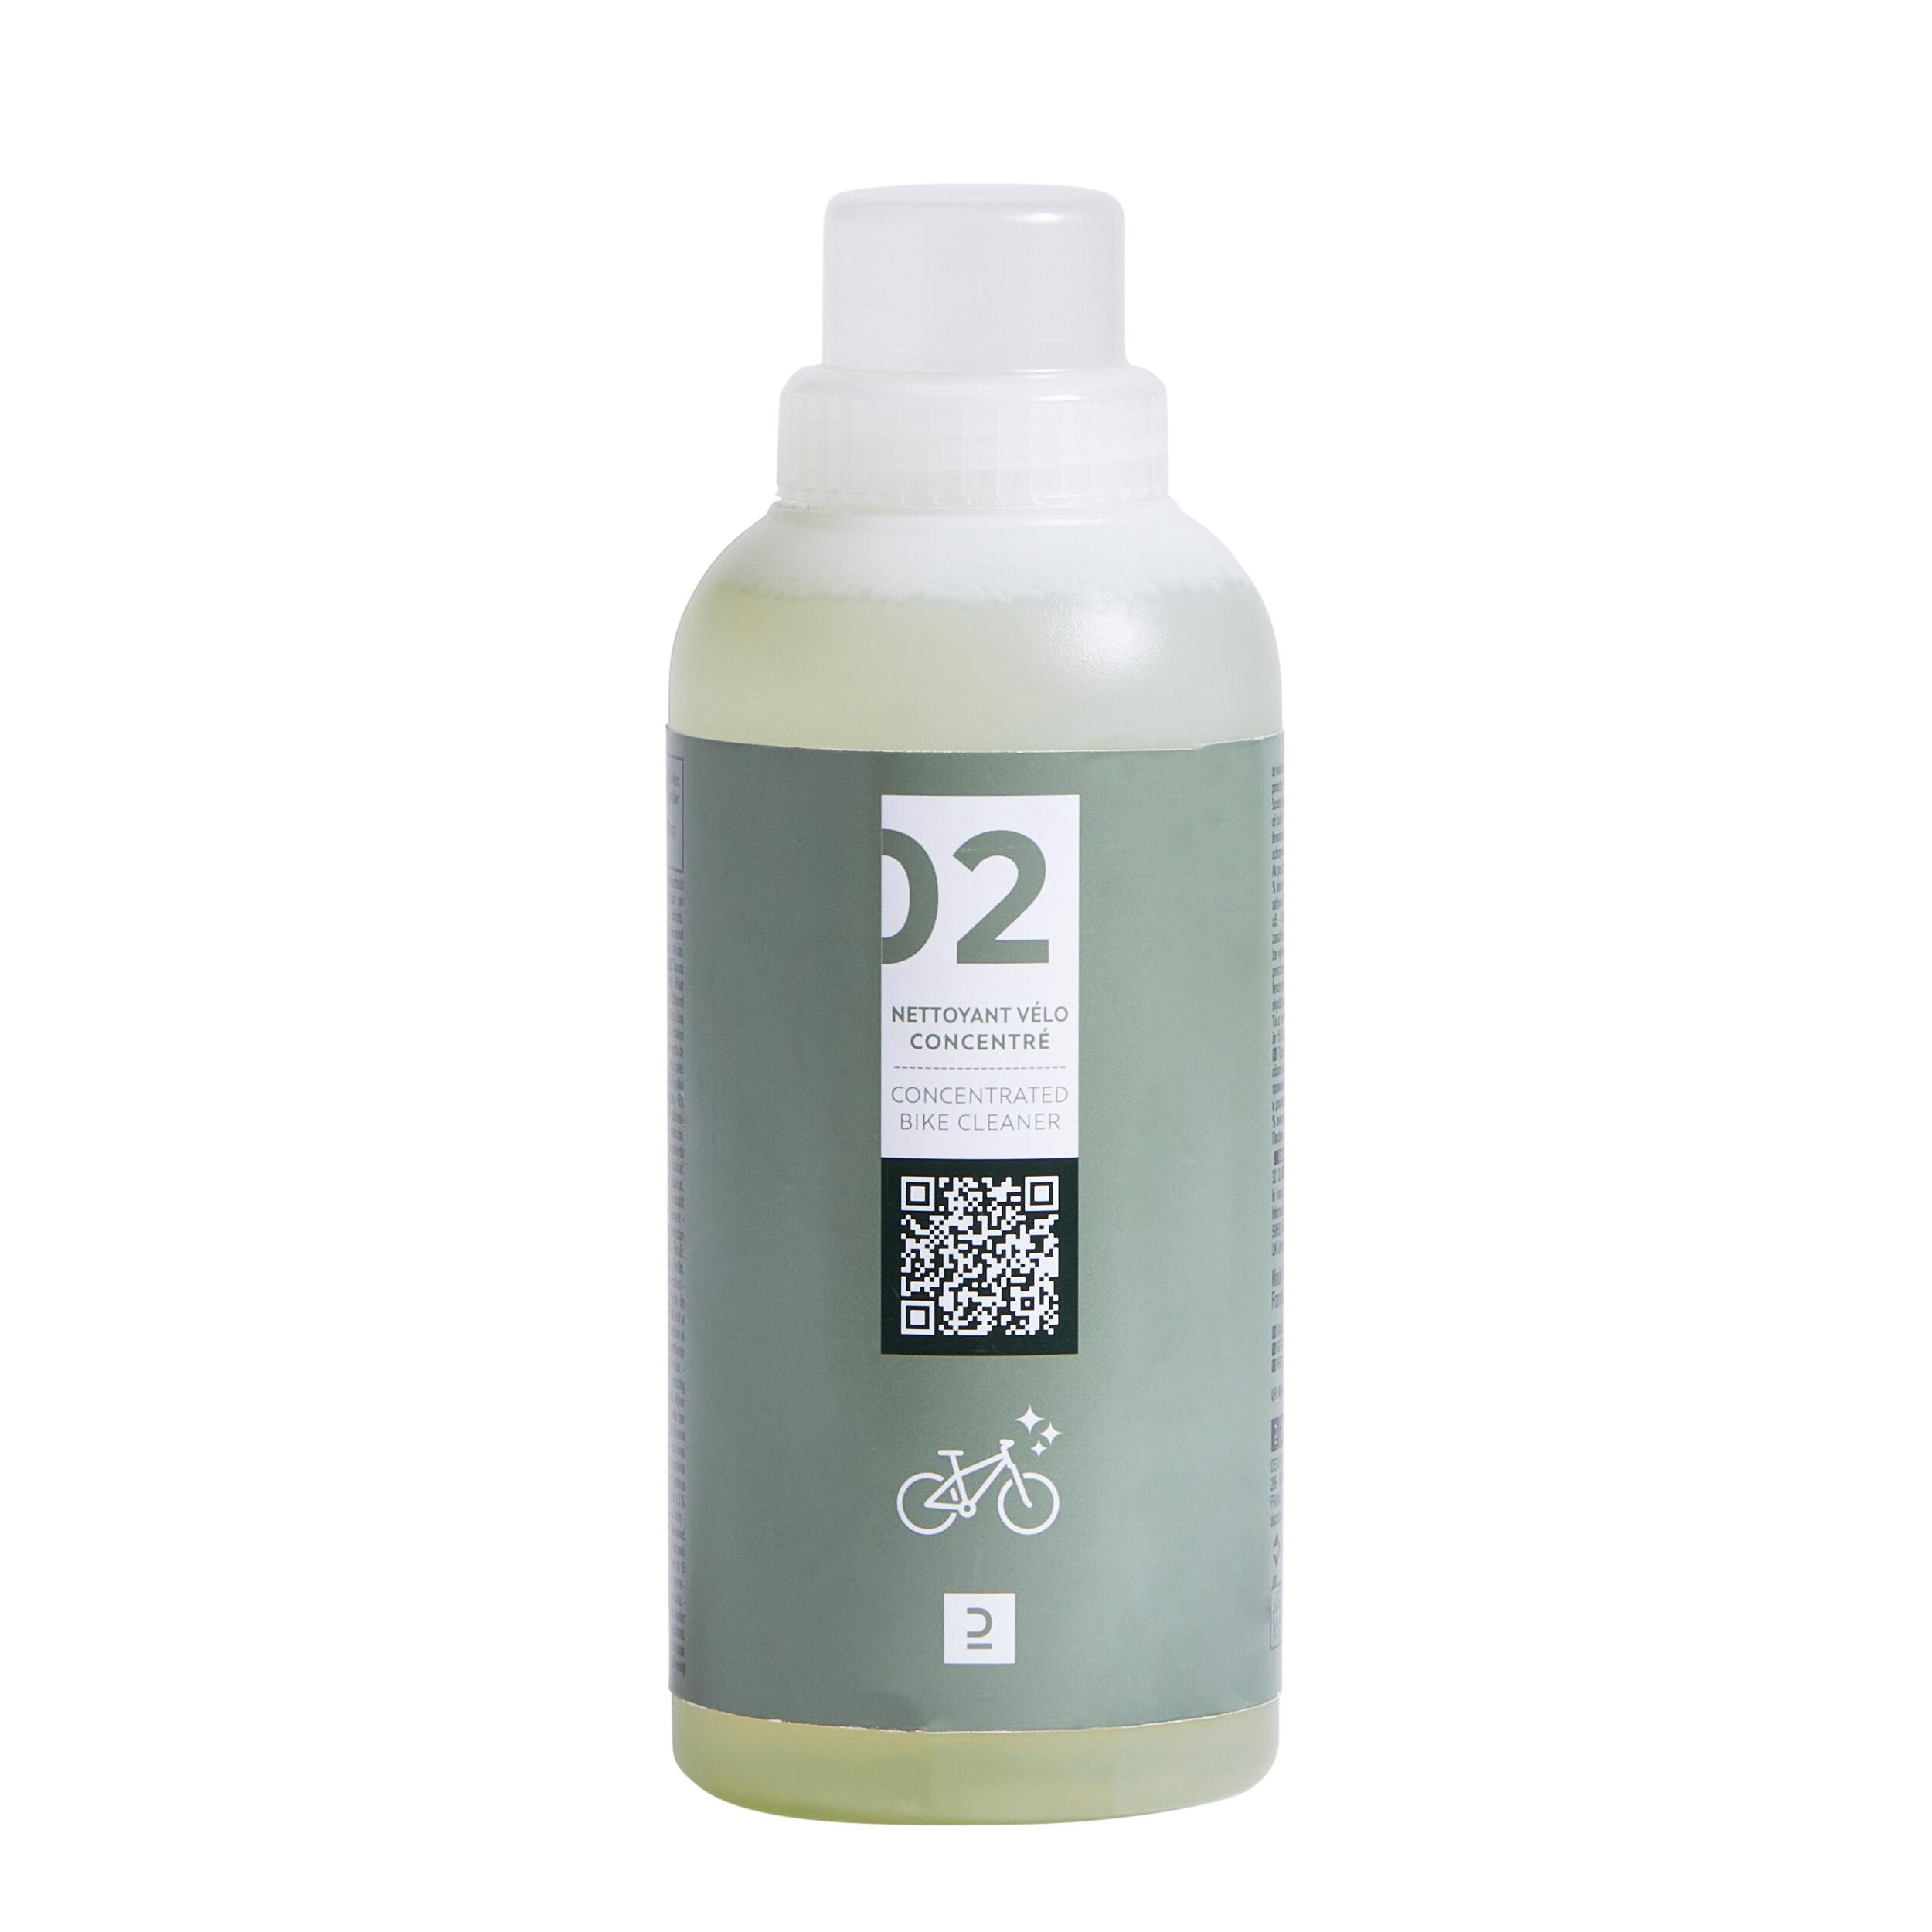 DECATHLON Concentrated Bike Cleaner - 500 ml